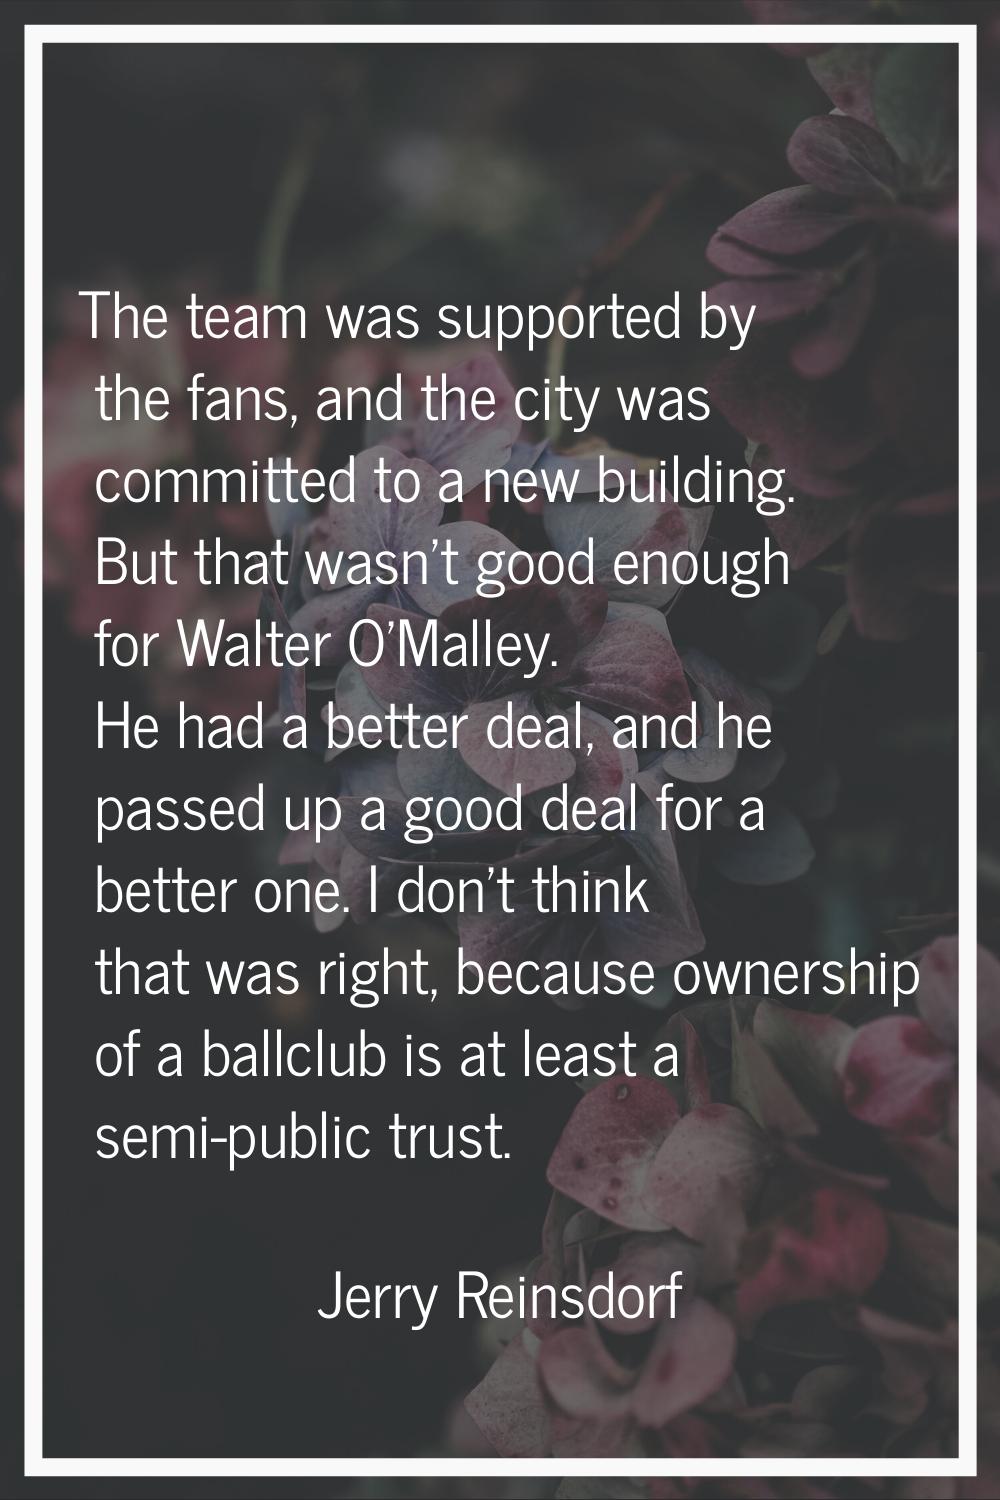 The team was supported by the fans, and the city was committed to a new building. But that wasn't g